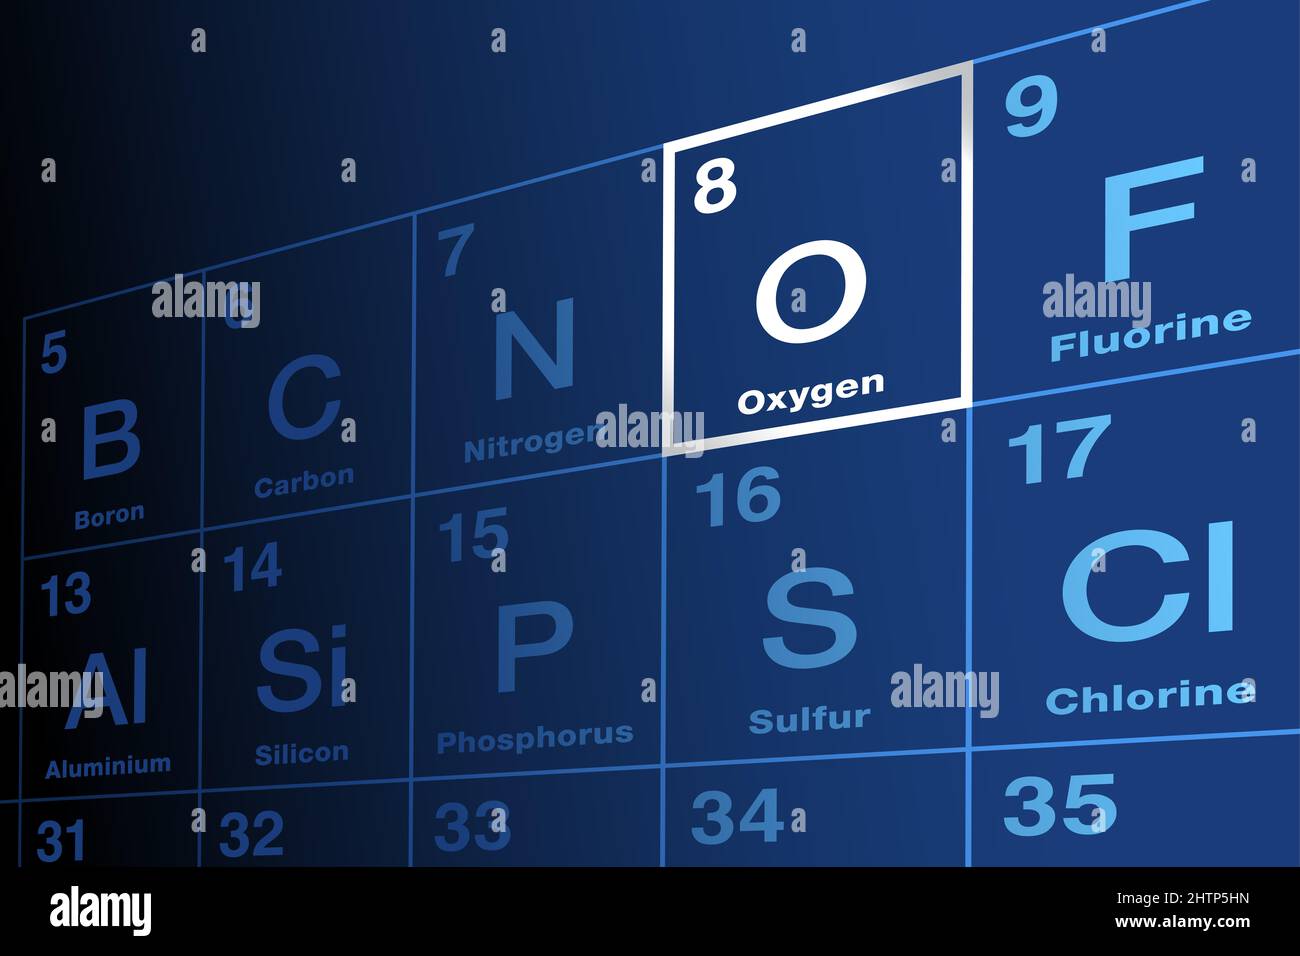 Oxygen, chemical element on the periodic table of elements. Element symbol O and atomic number 8. Highly reactive nonmetal and oxidizing agent. Stock Photo